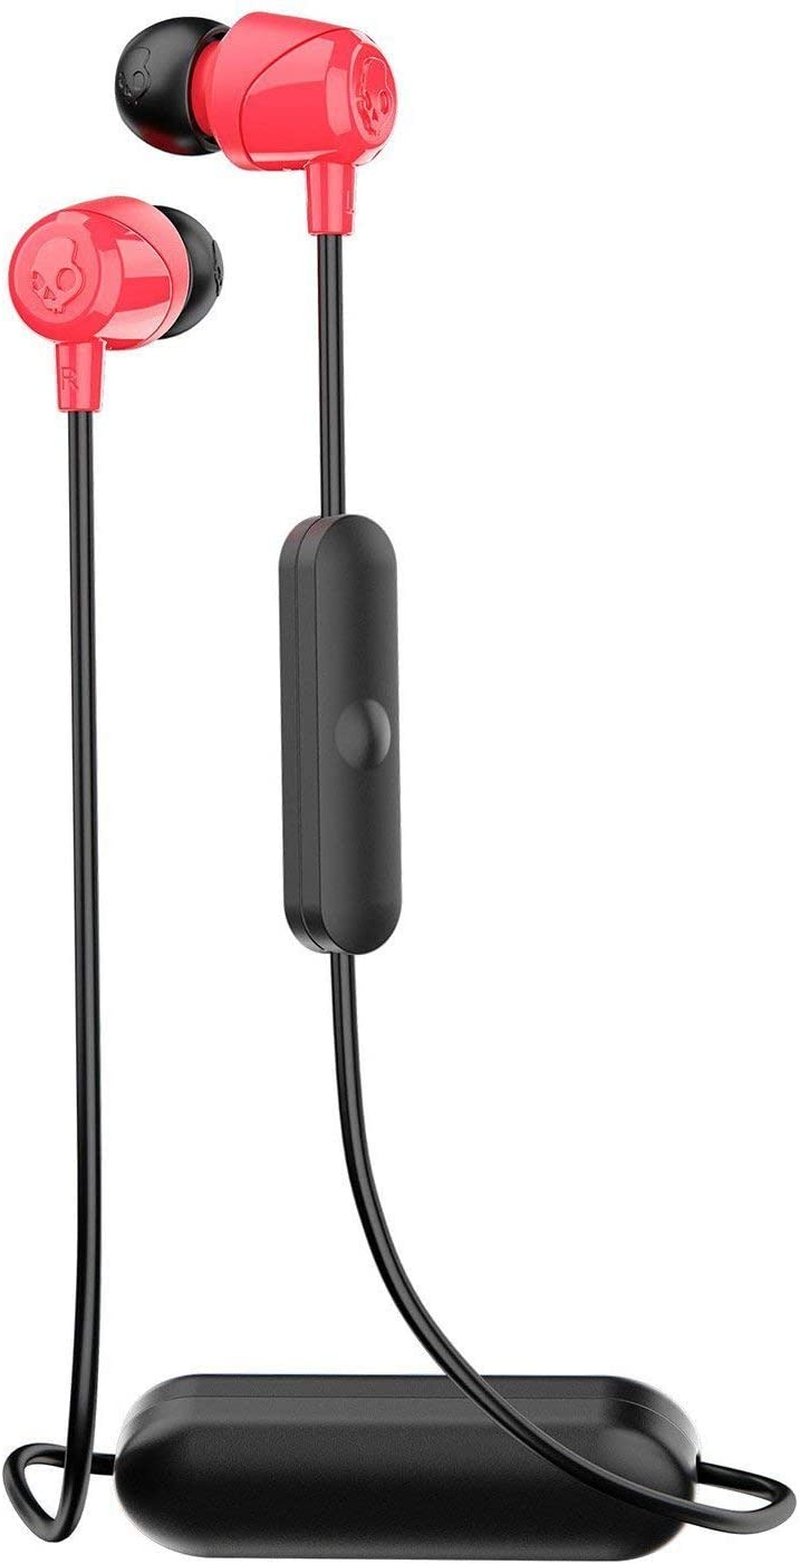 Skullcandy Jib Bluetooth Wireless In-Ear Earbuds with Microphone for Hands-Free Calls, 6-Hour Rechargeable Battery, Included Ear Gels for Noise Isolation, Black/Street (Renewed)